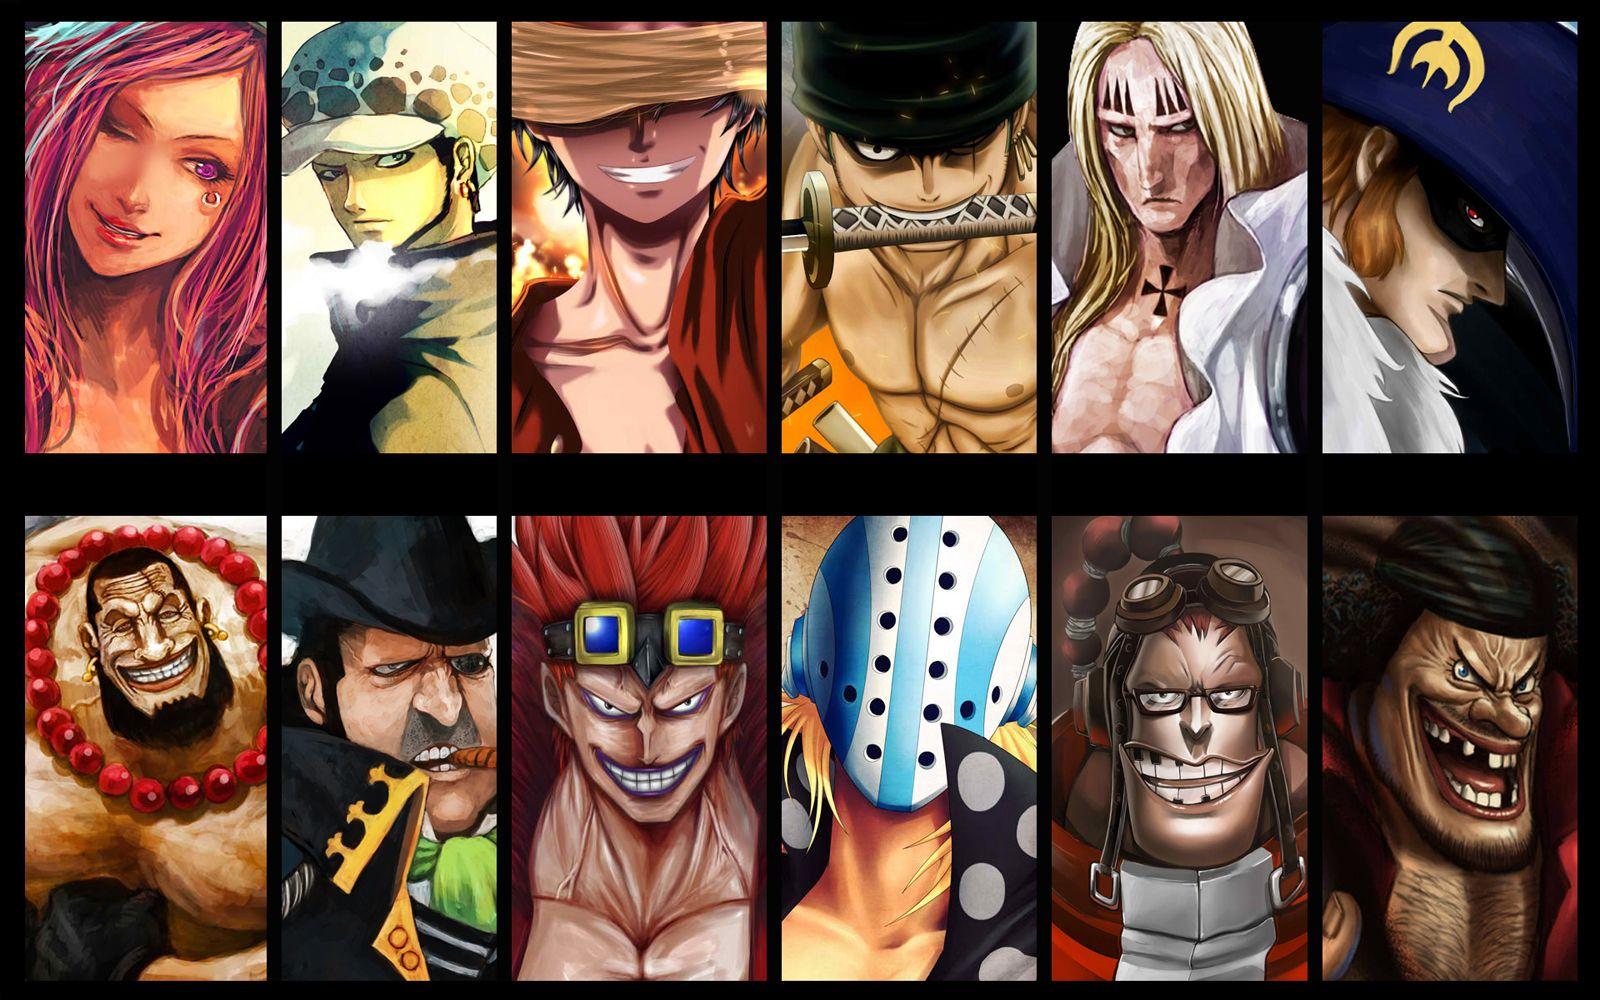 Worst Generation Supernova One Piece Wallpaper by xkronos. Daily Anime Art